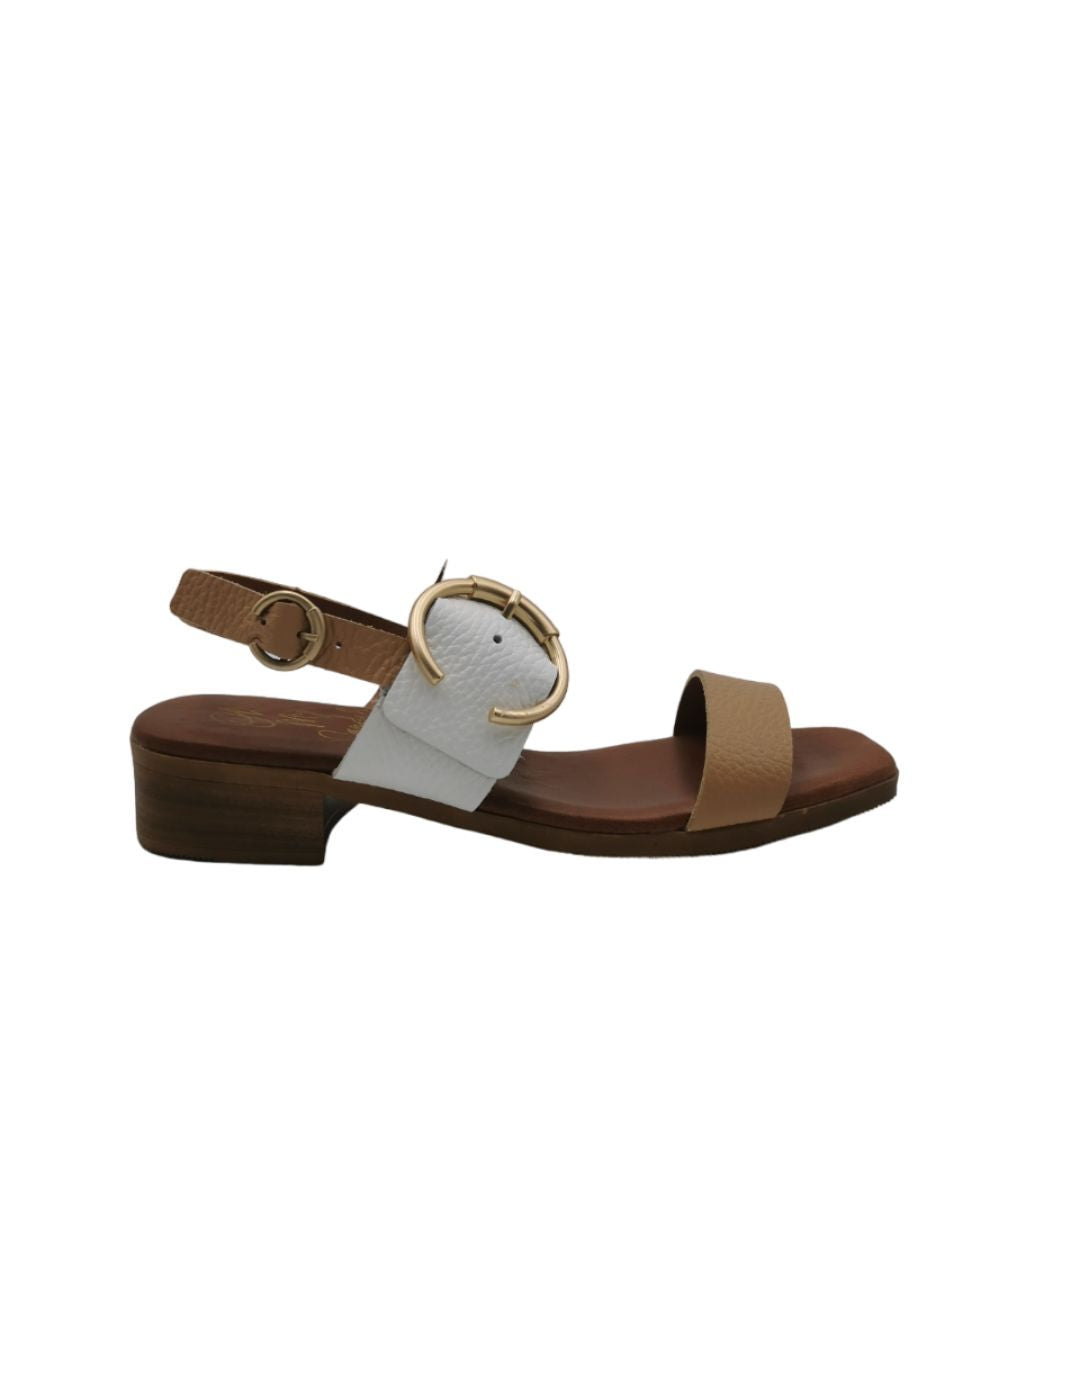 Oh my Sandals 5170 Beige